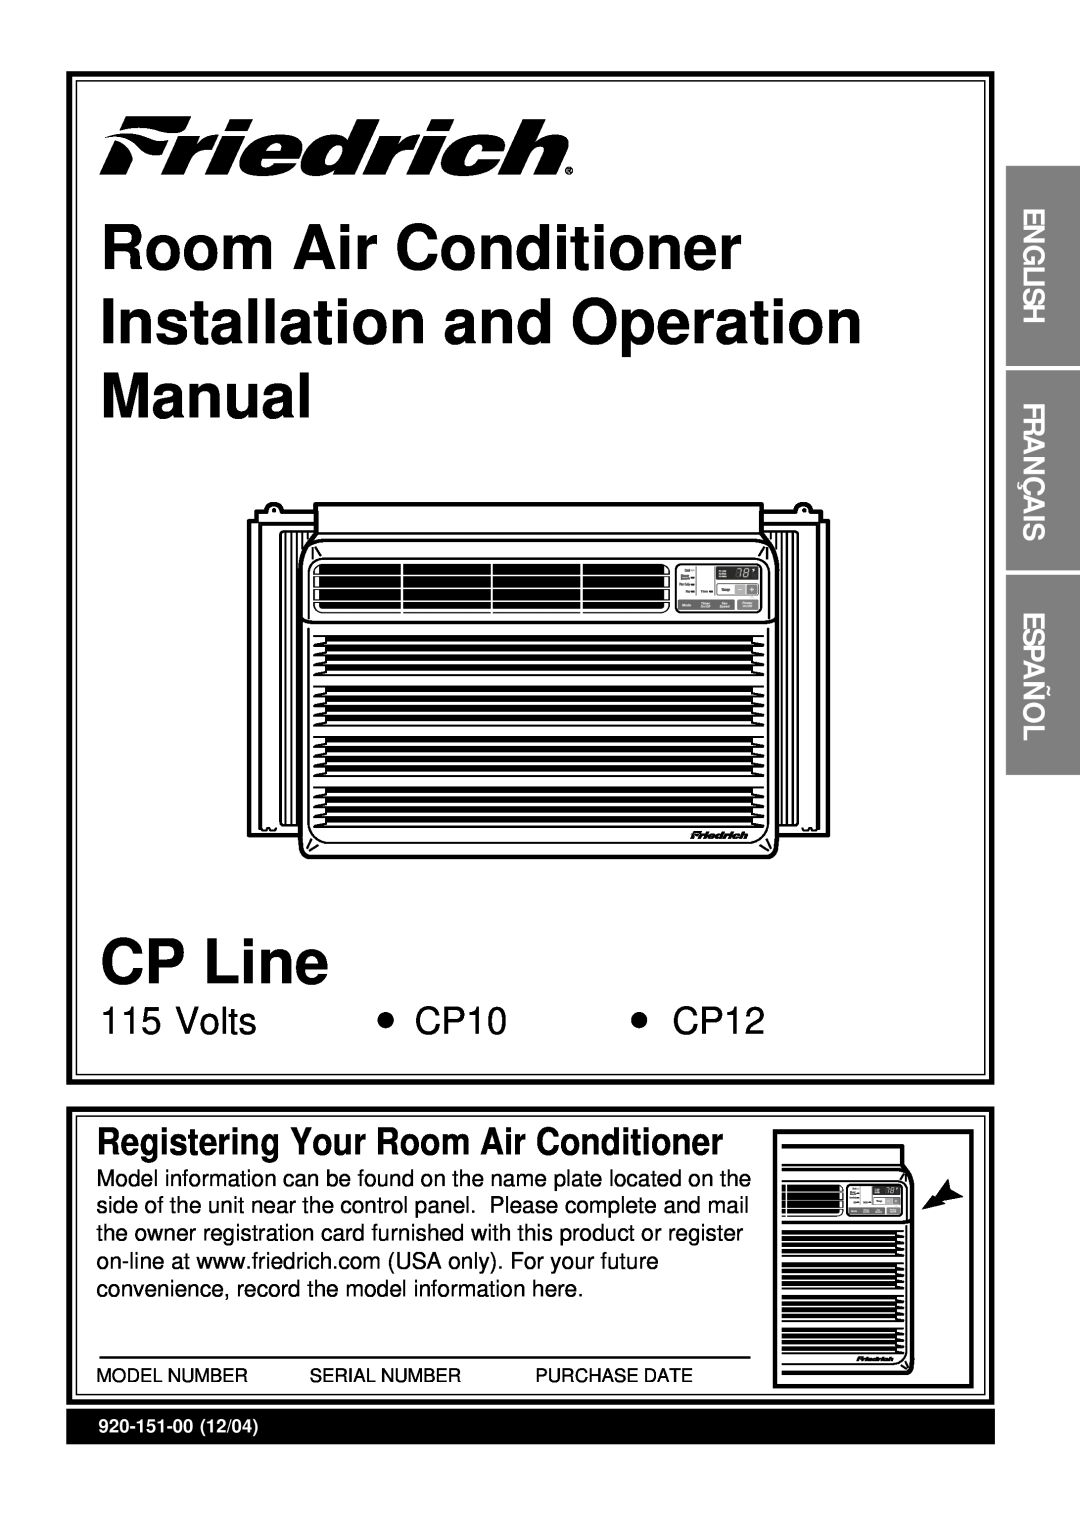 Friedrich CP10 operation manual Room Air Conditioner, Installation and Operation, Manual, CP Line, Volts, CP12 